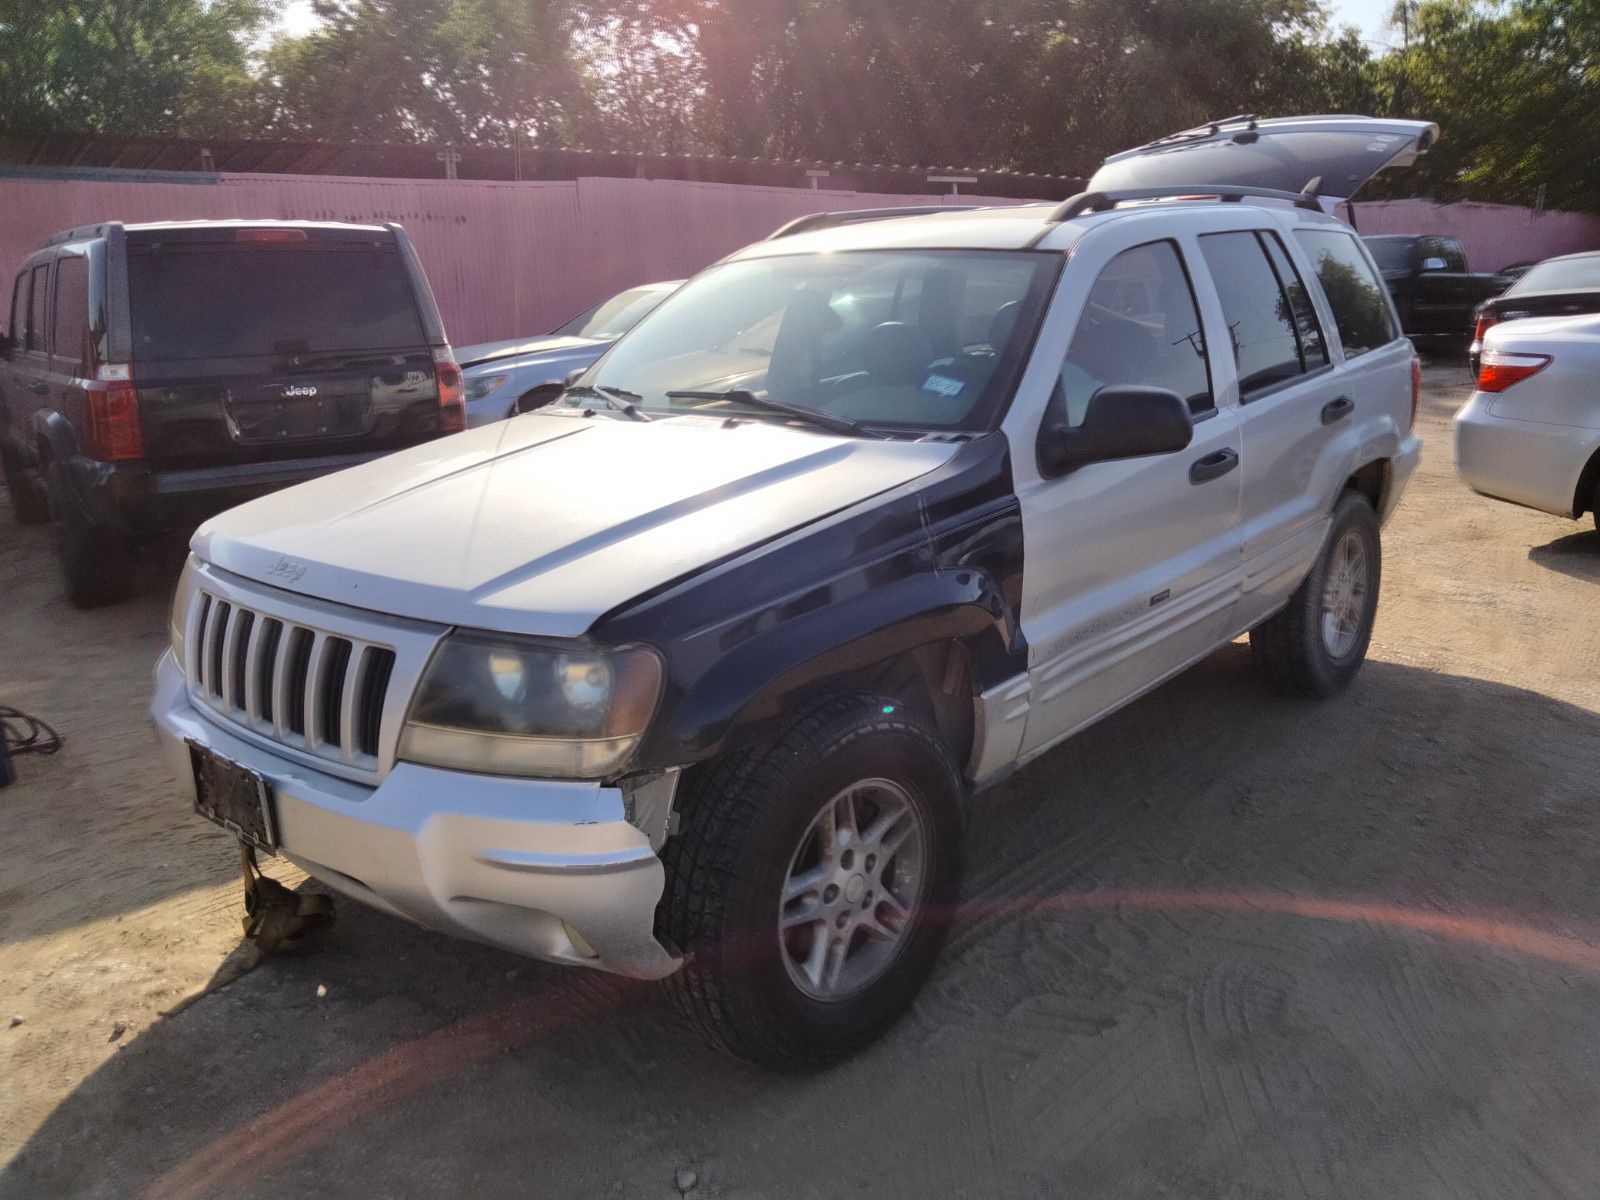 2004 Jeep Grand Cherokee - Parts Only #T16